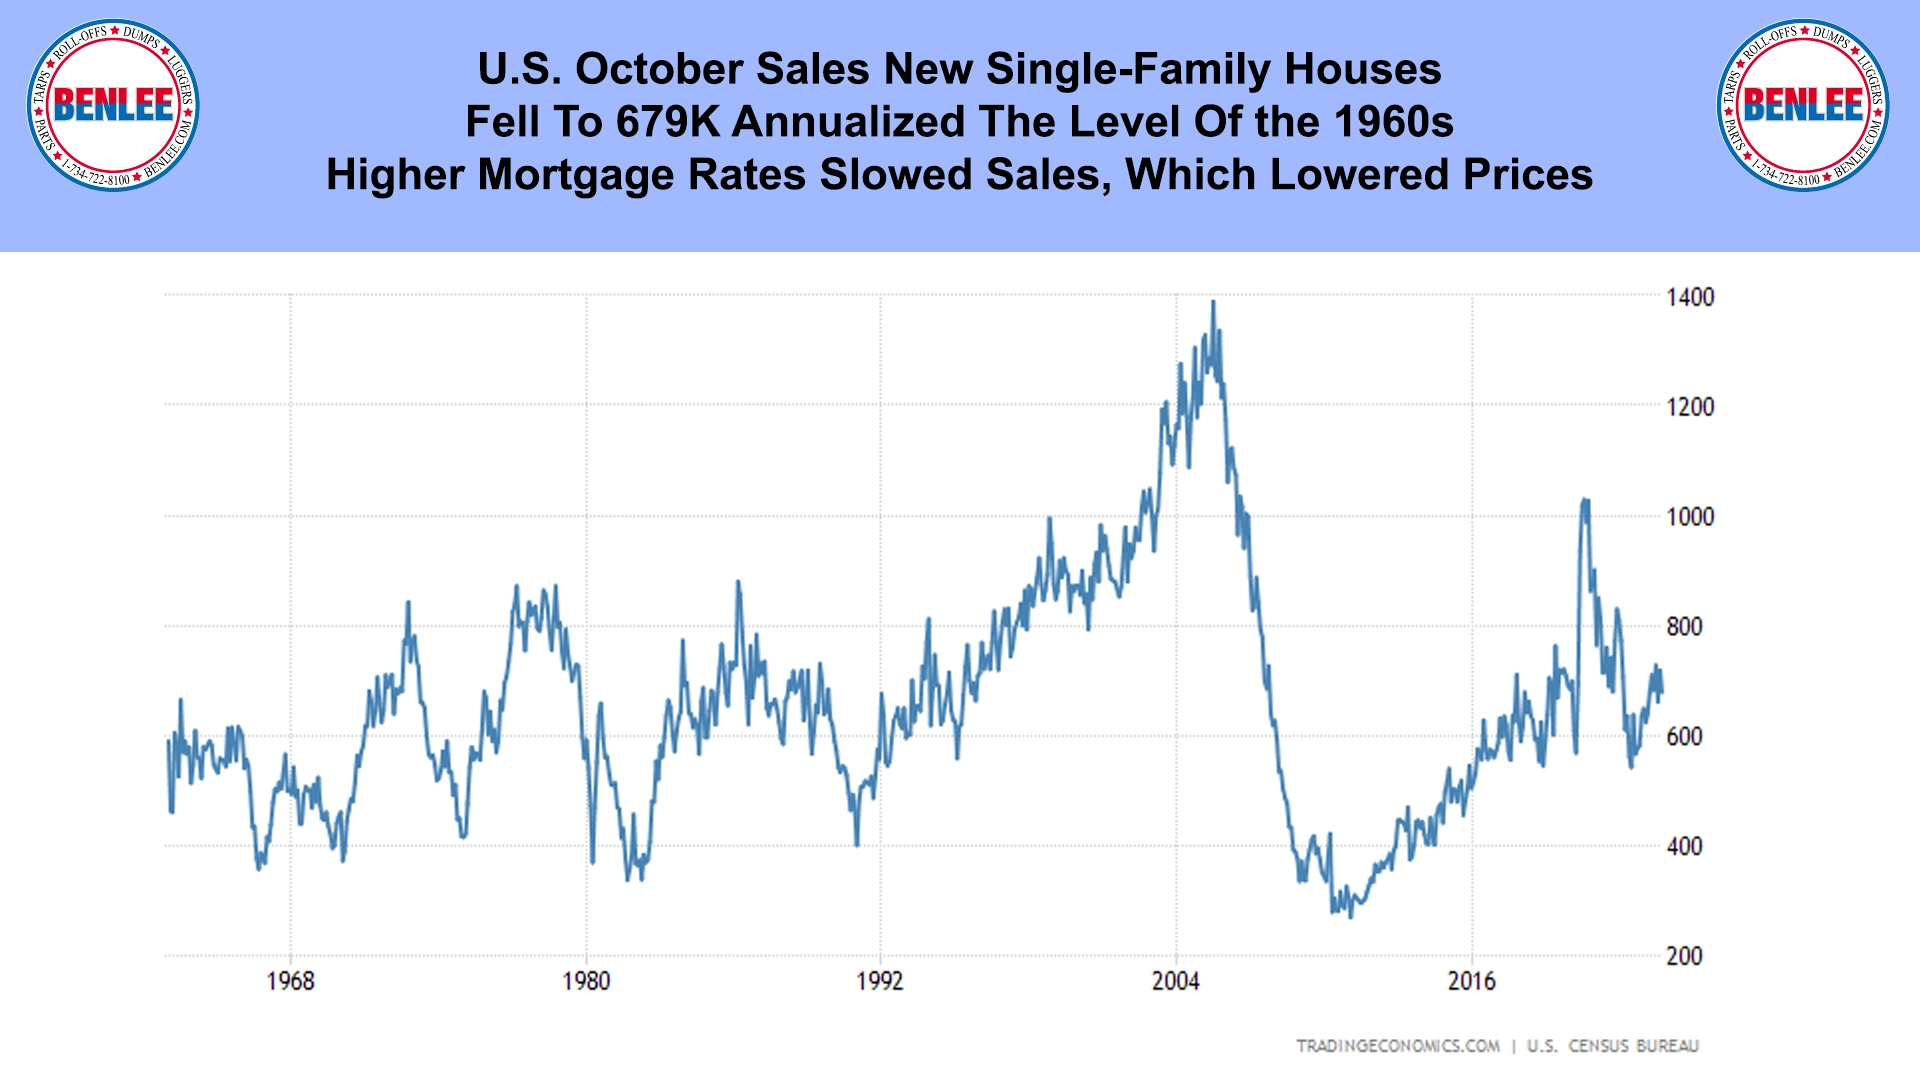 U.S. October Sales New Single-Family Houses